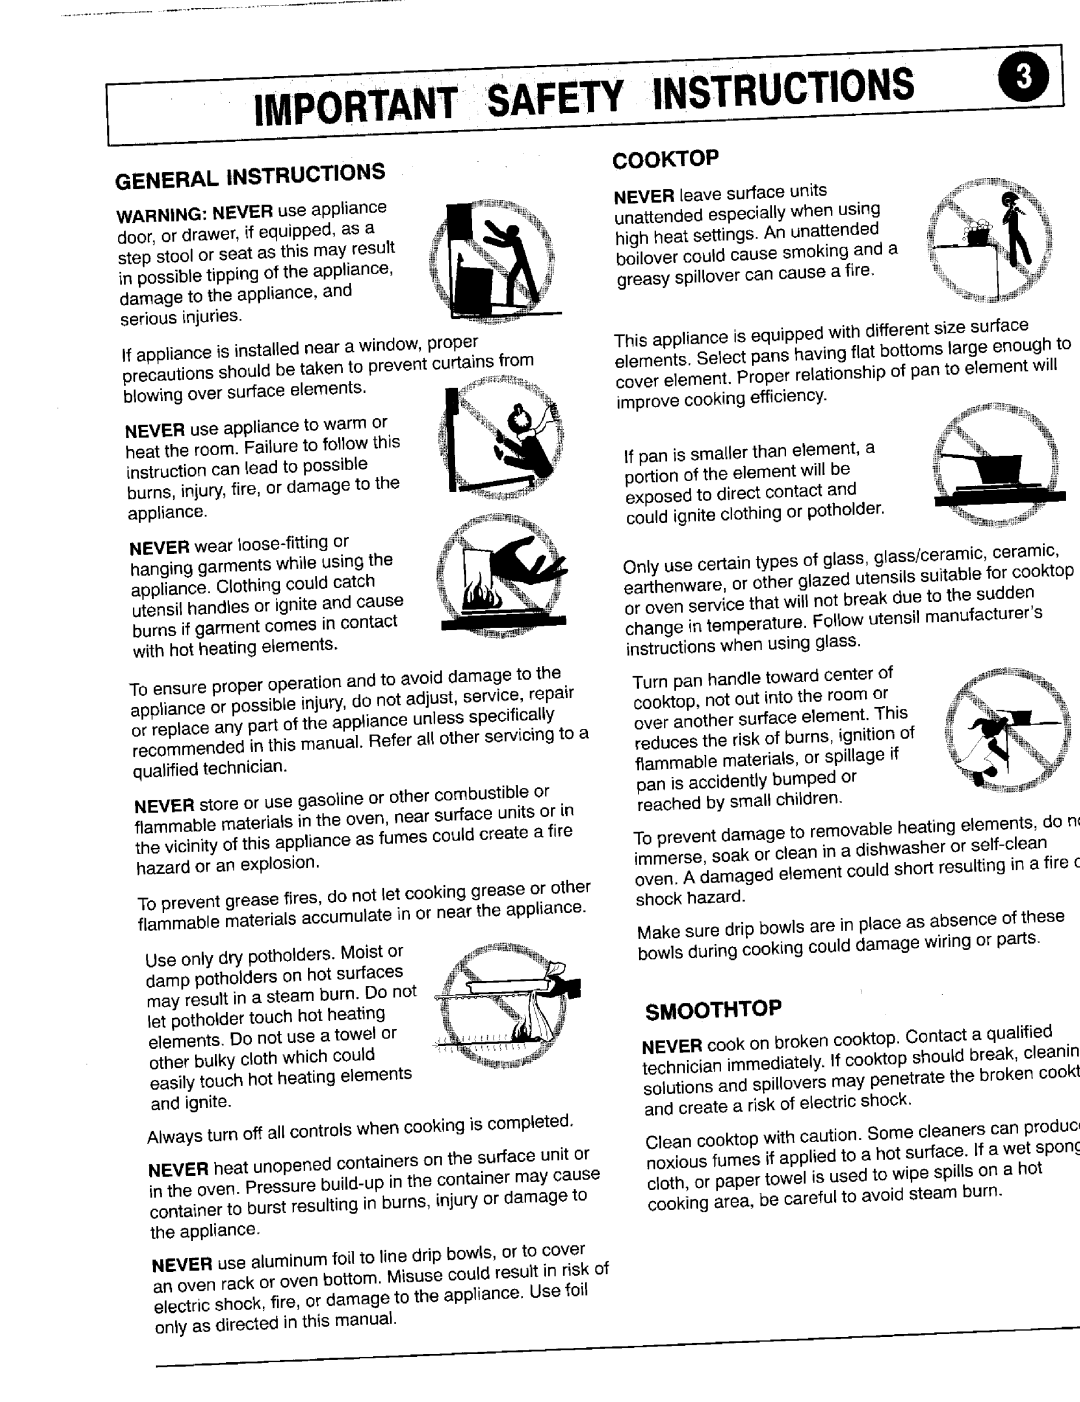 Maytag 8111P375-60 important safety instructions I Importantsafe Instructions, General Instructions, Cooktop, Smoothtop 